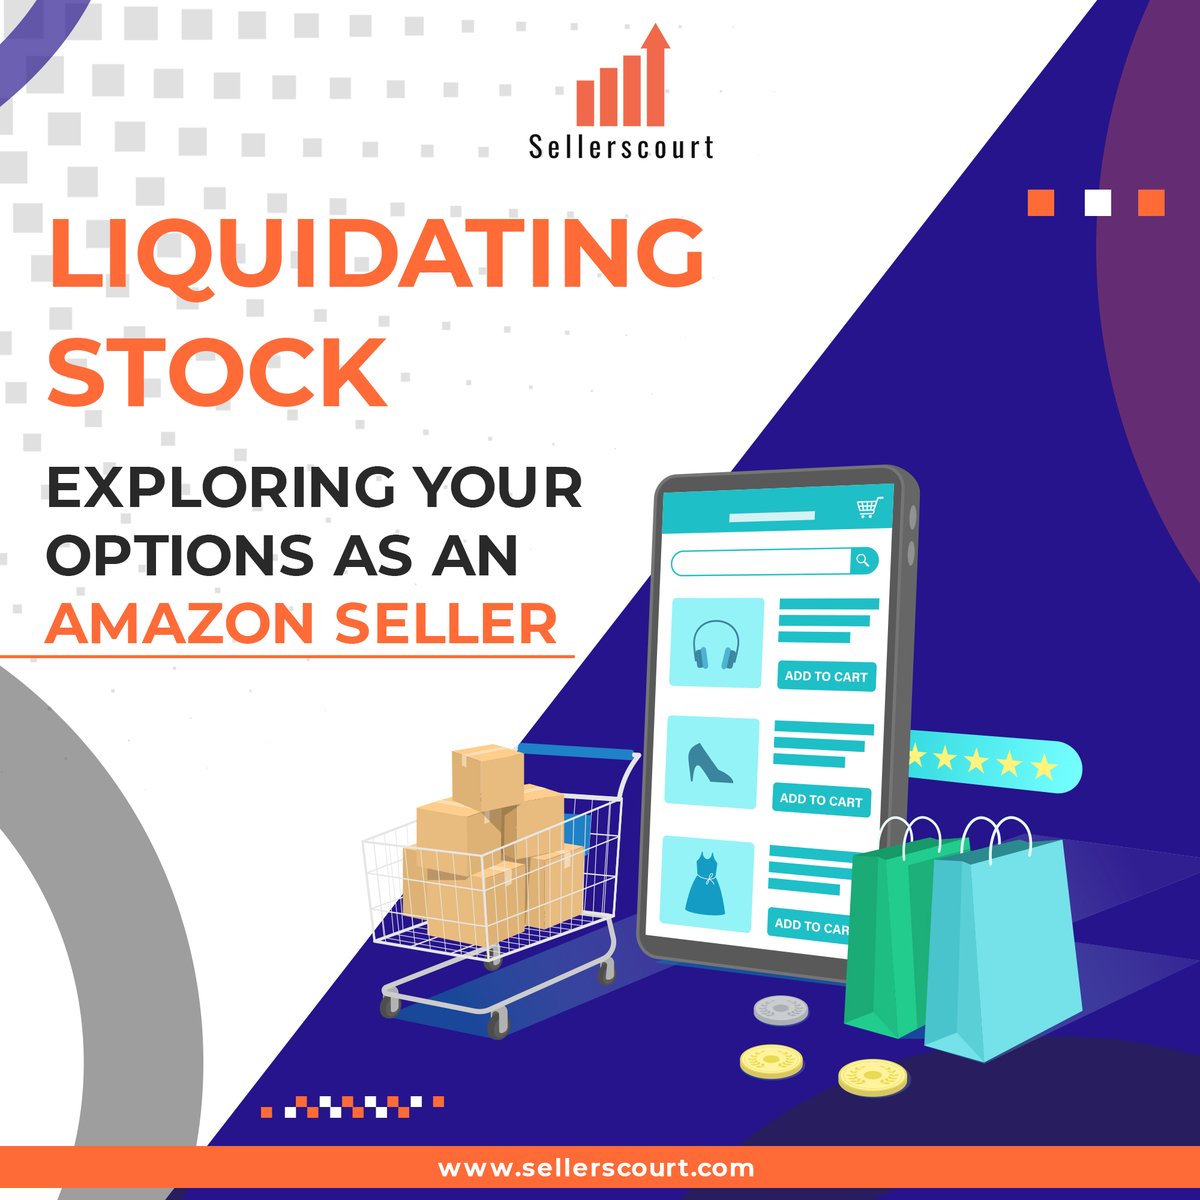 Liquidating Stock: Exploring Your Options as an Amazon Seller in 2023
#SellerCourt #AmazonStockLiquidation #LiquidationOptions #AmazonLiquidationProgram #SellOnOtherMarketplaces #HostClearanceSale #PartnerWithConsignmentStore #DonateOrDisposeInventory https://t.co/QWoHKlAPz3